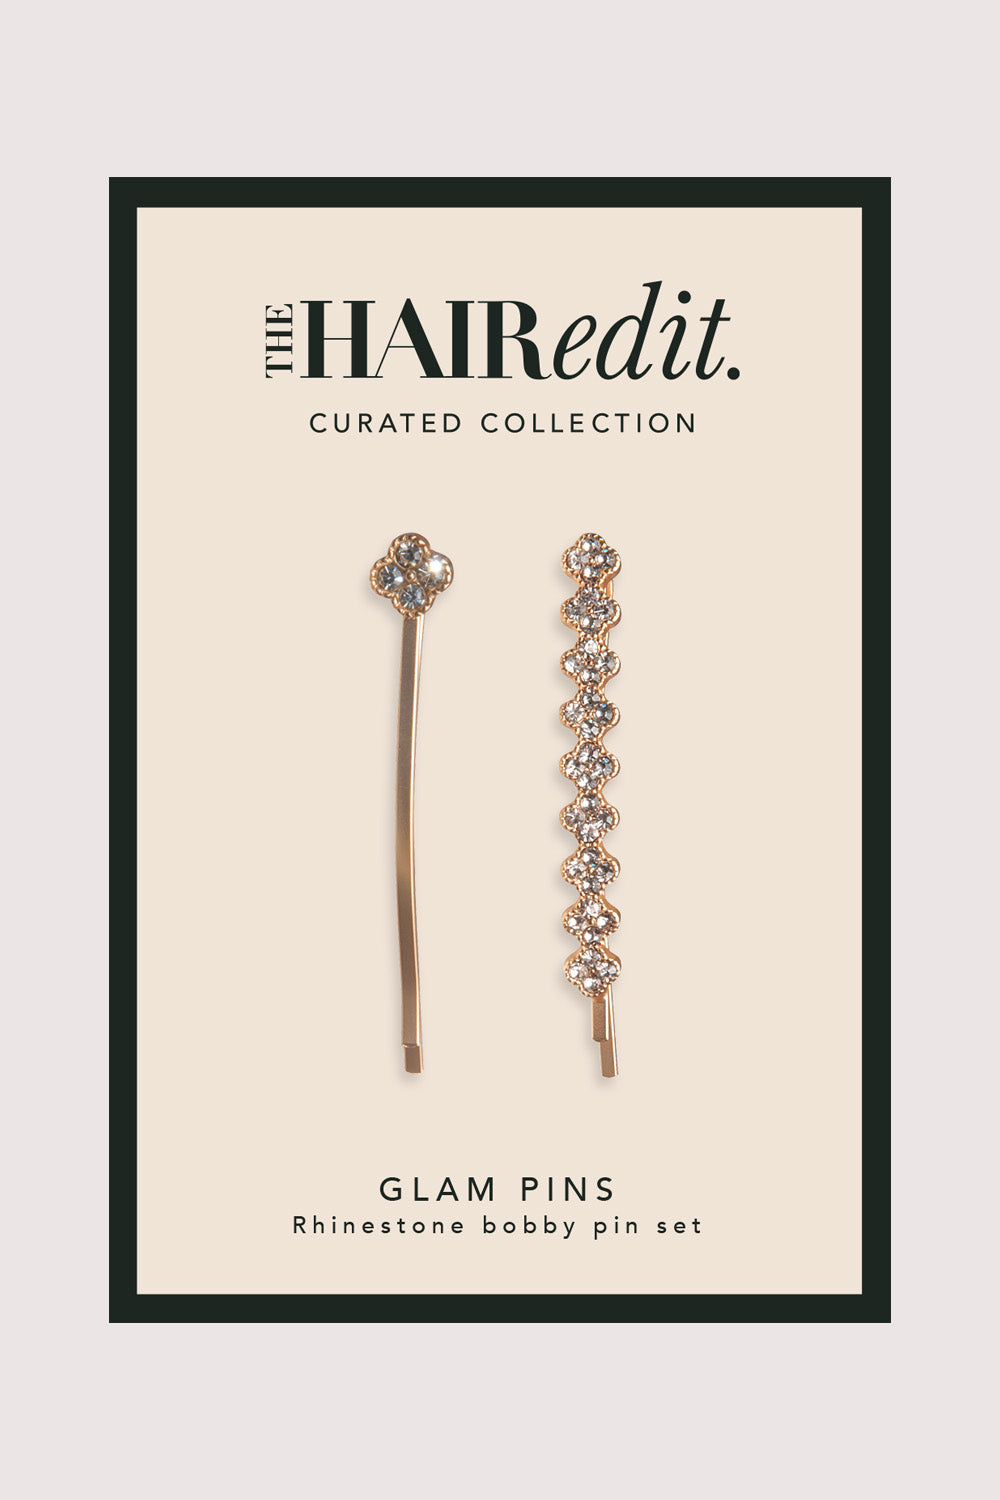 Rhinestone hair pins perfect for giving your fancy updo an even